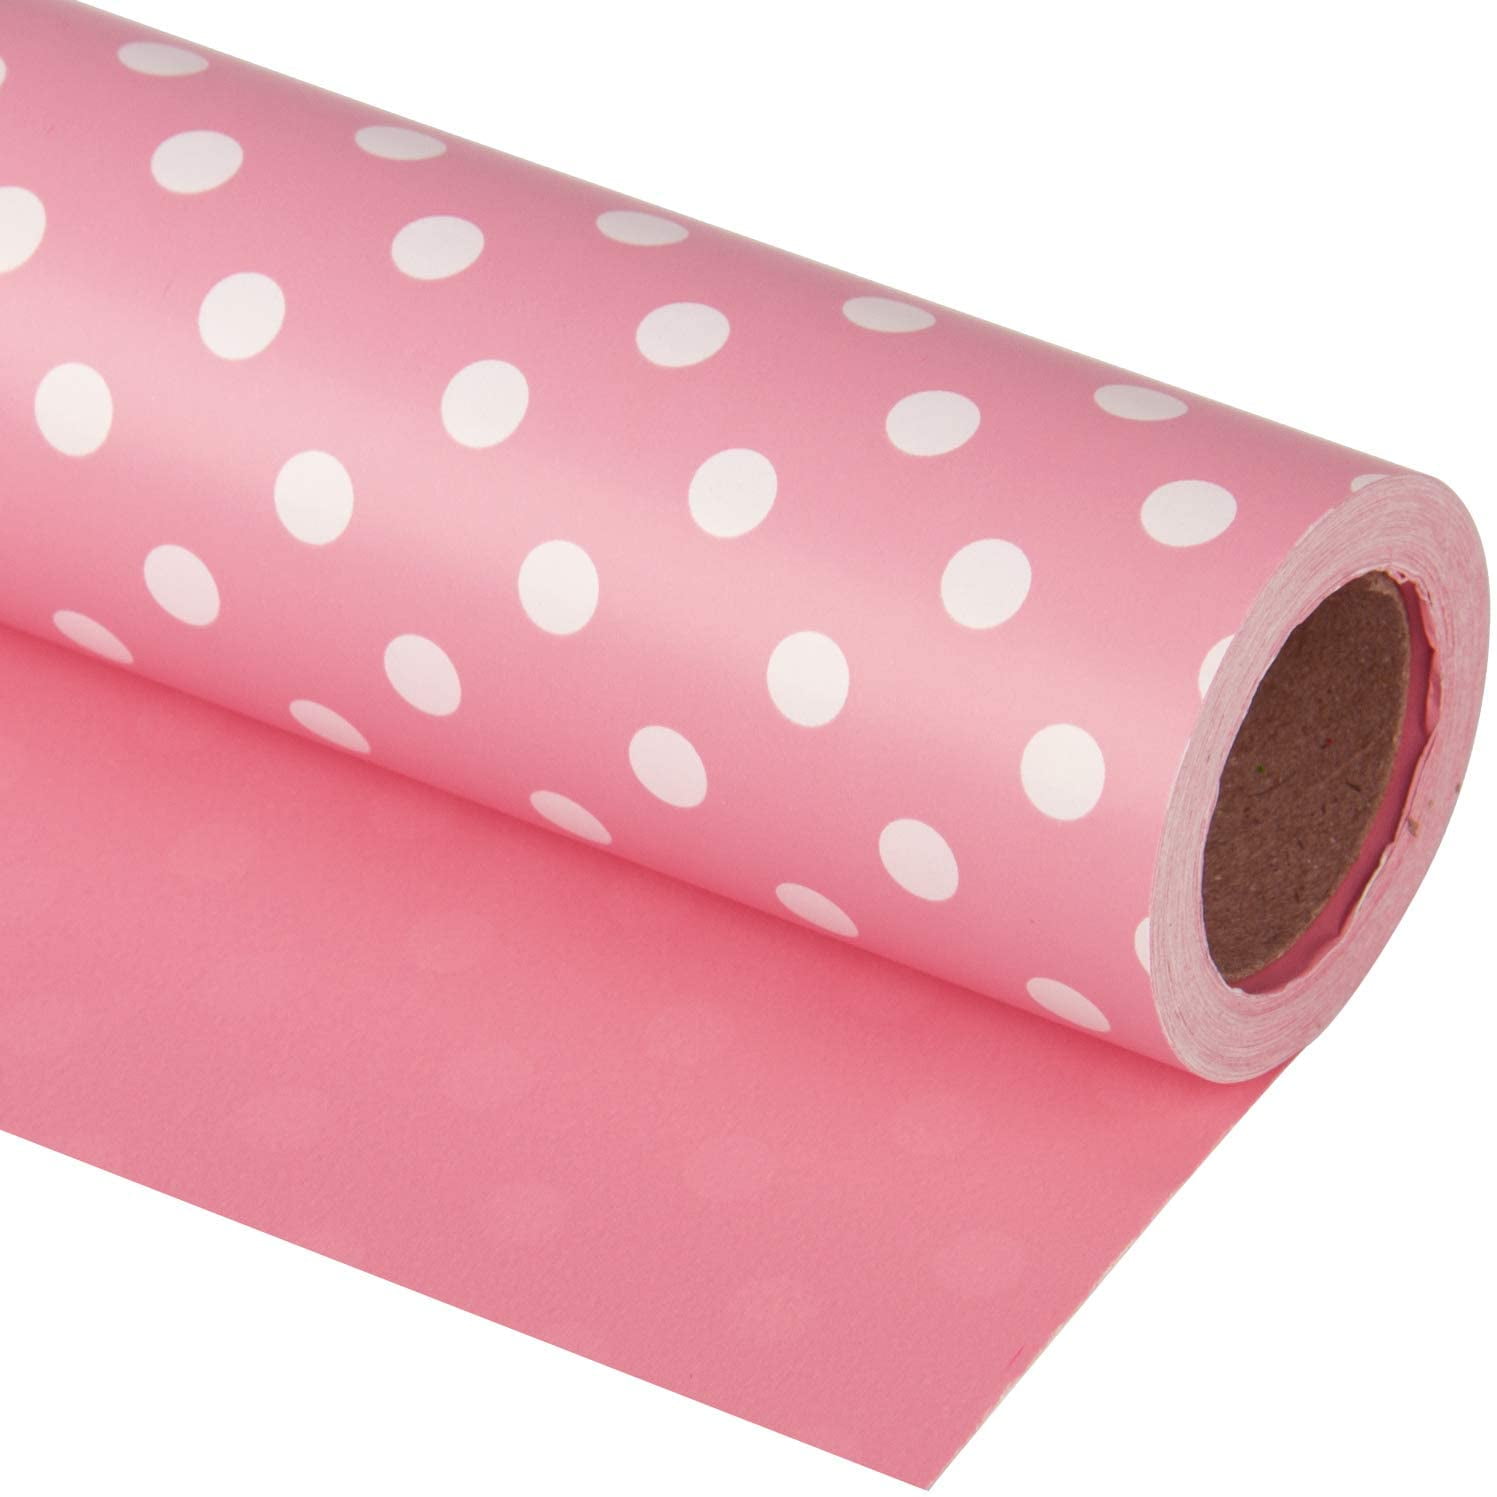  WRAPAHOLIC Reversible Birthday Wrapping Paper - Mini Roll - 17  Inch X 33 Feet - Hot Pink and Silver Foil Happy Birthday Lettering Design  for Birthday, Holiday, Party, Baby Shower : Health & Household